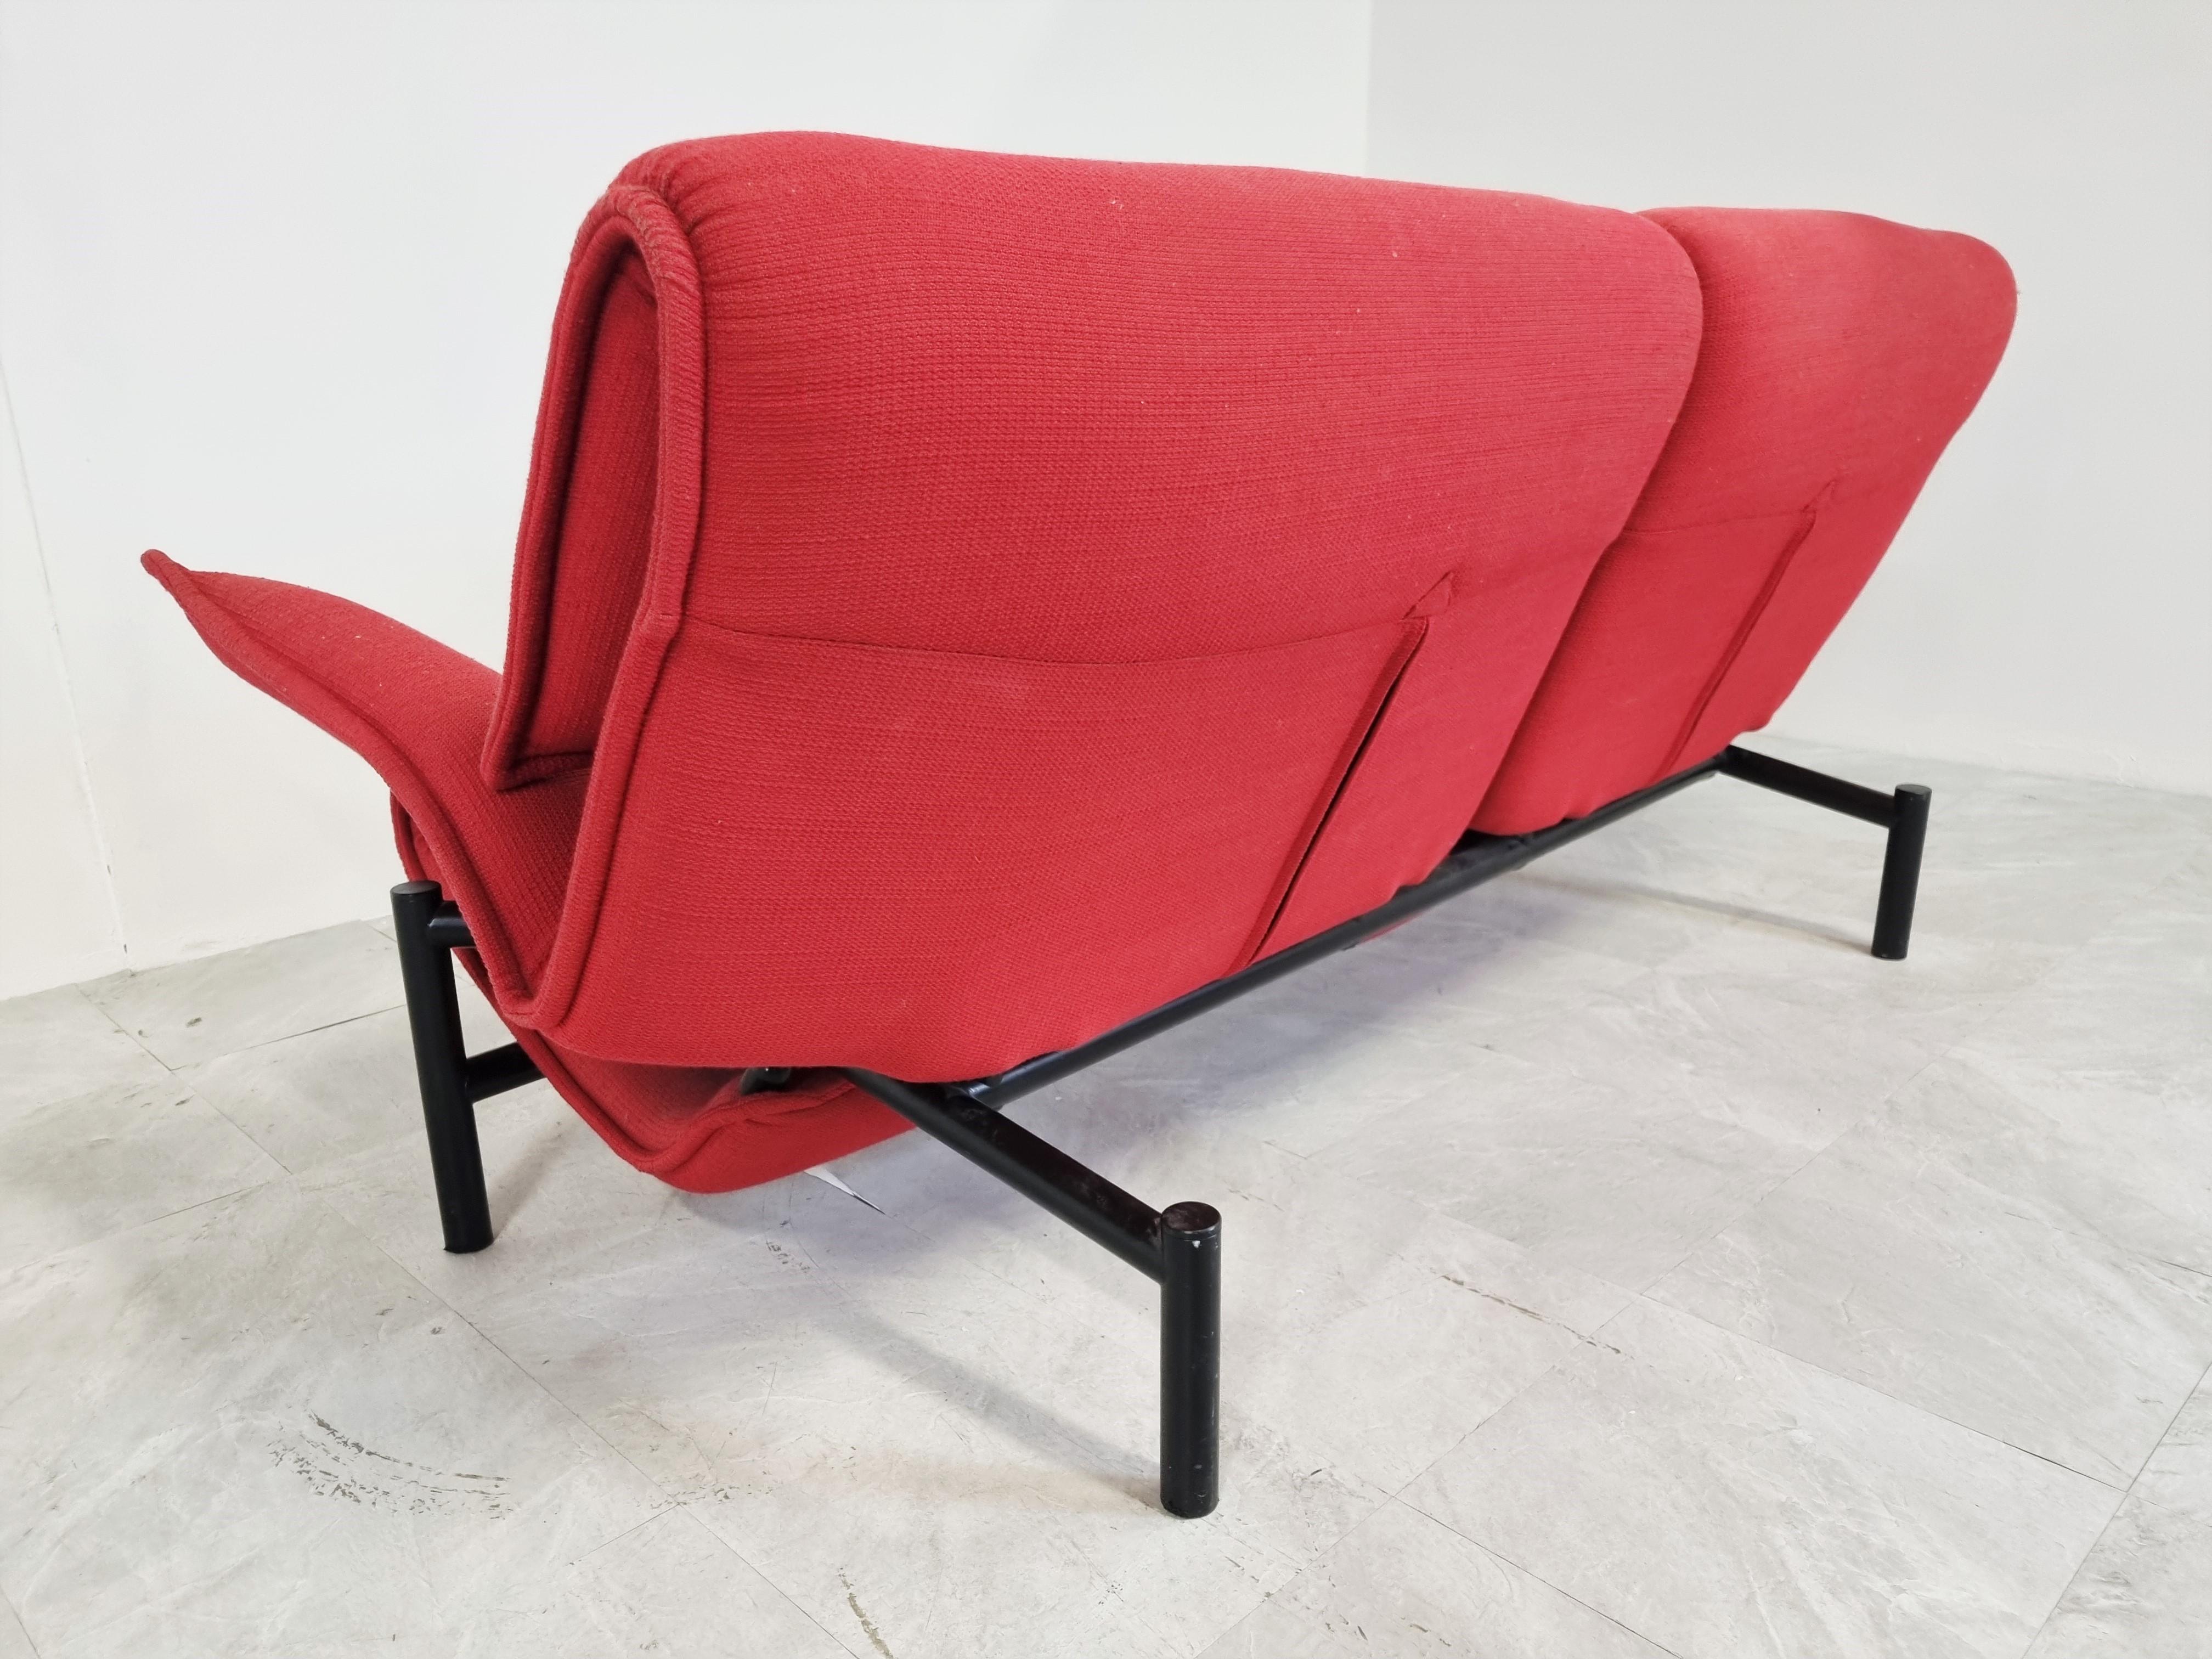 Vintage red fabric veranda two seater sofa/daybed designed by Vico Magistretti for Cassina.

Beautiful lively red colour and black lacquered metal frame.

The chair is adjustable in various way and has an ergonomic and timeless